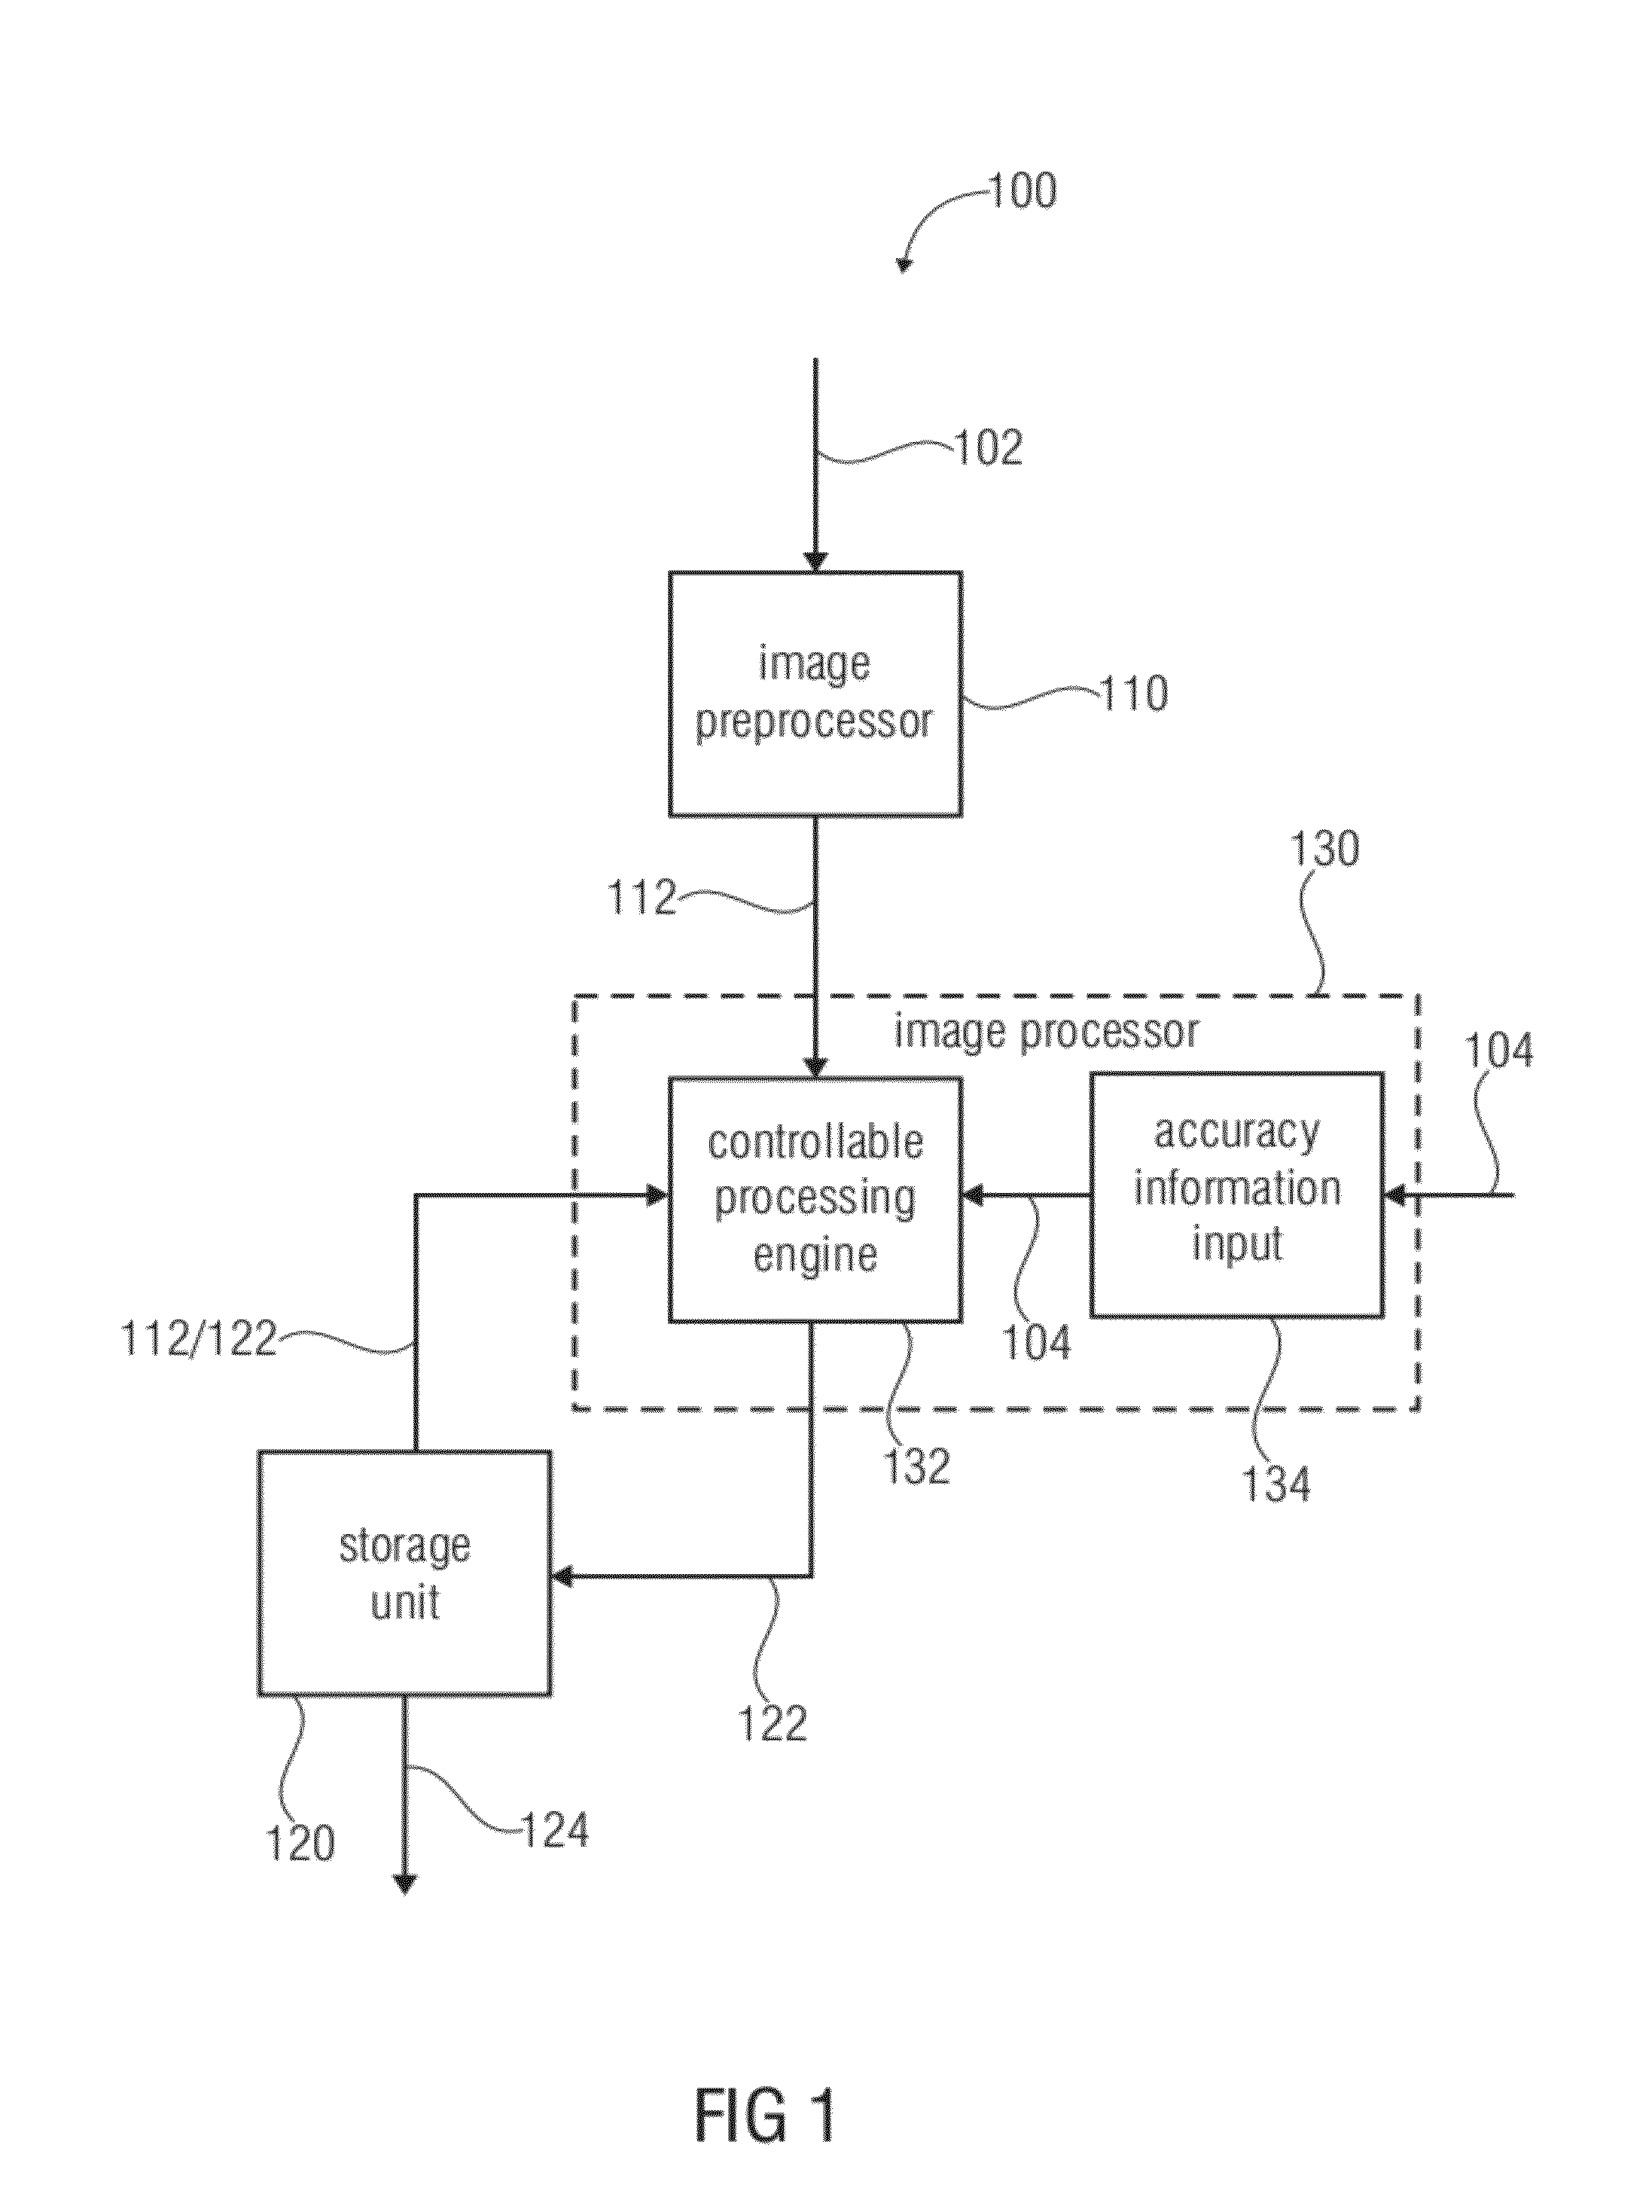 Apparatus and method for generating an overview image of a plurality of images using an accuracy information